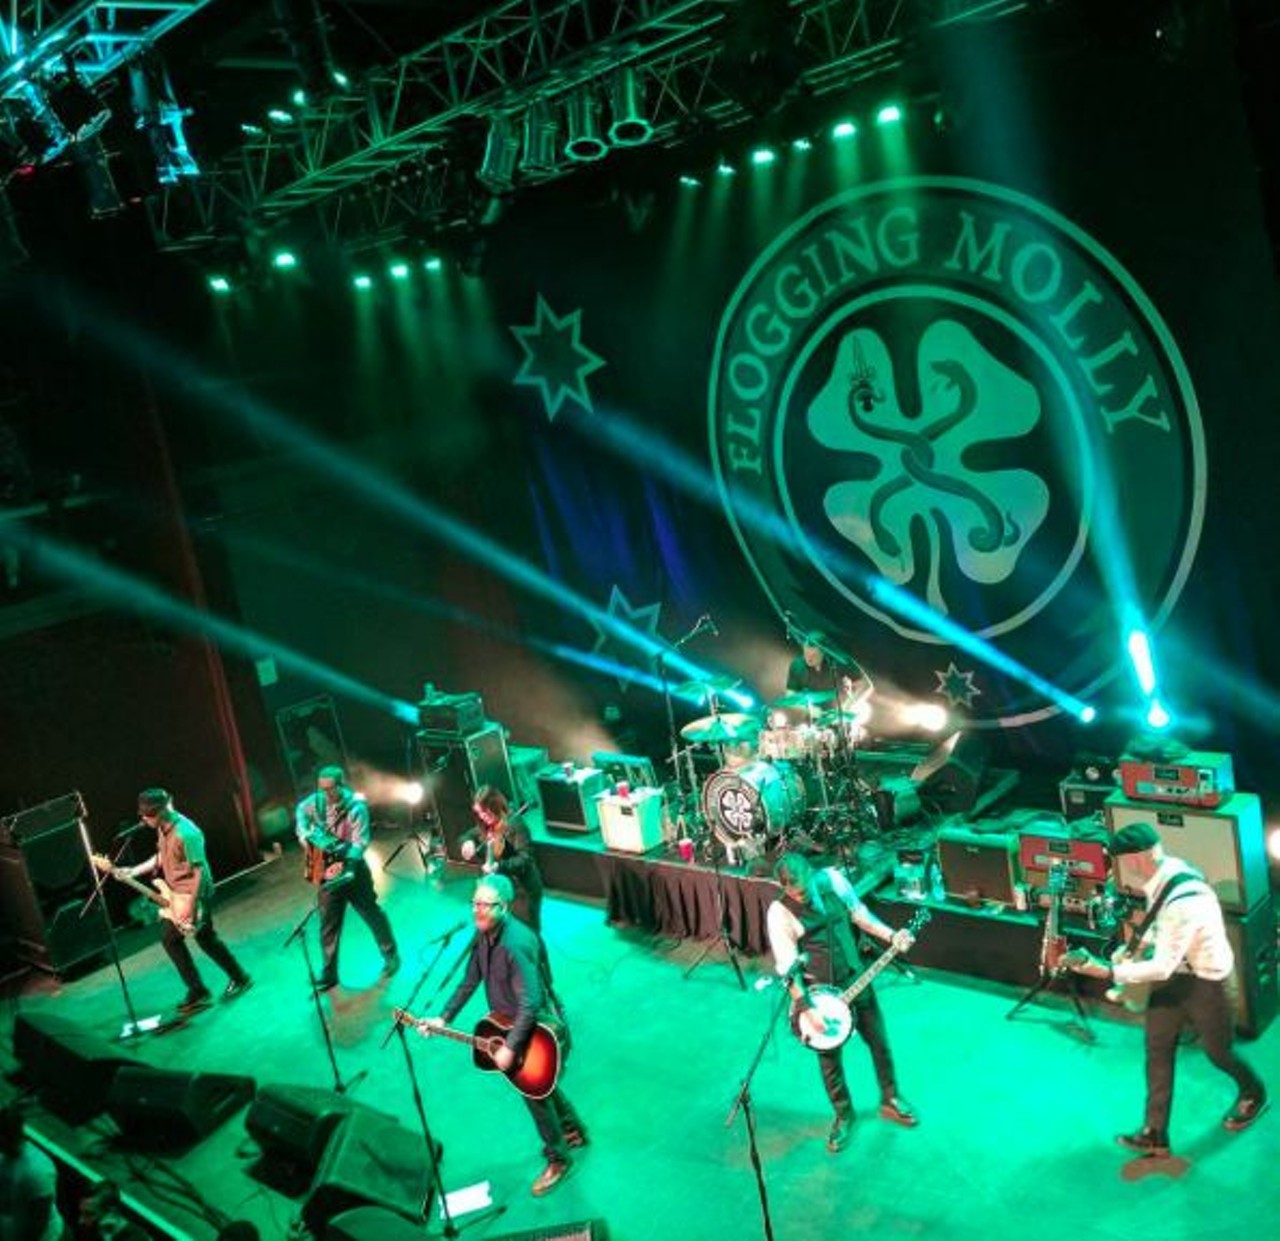 Flogging Molly
Saturday, 6/3
This Celtic punk band is definitely something you haven&#146;t seen before. With the release of their new album only a day before they play in Detroit, this show is a great way to start out the summer with new music and new concerts. 
7 p.m.; The Fillmore Detroit, Detroit, MI; thefillmoredetroit.com; tickets start at $25.
(Photo courtesy of IG user @snh001)